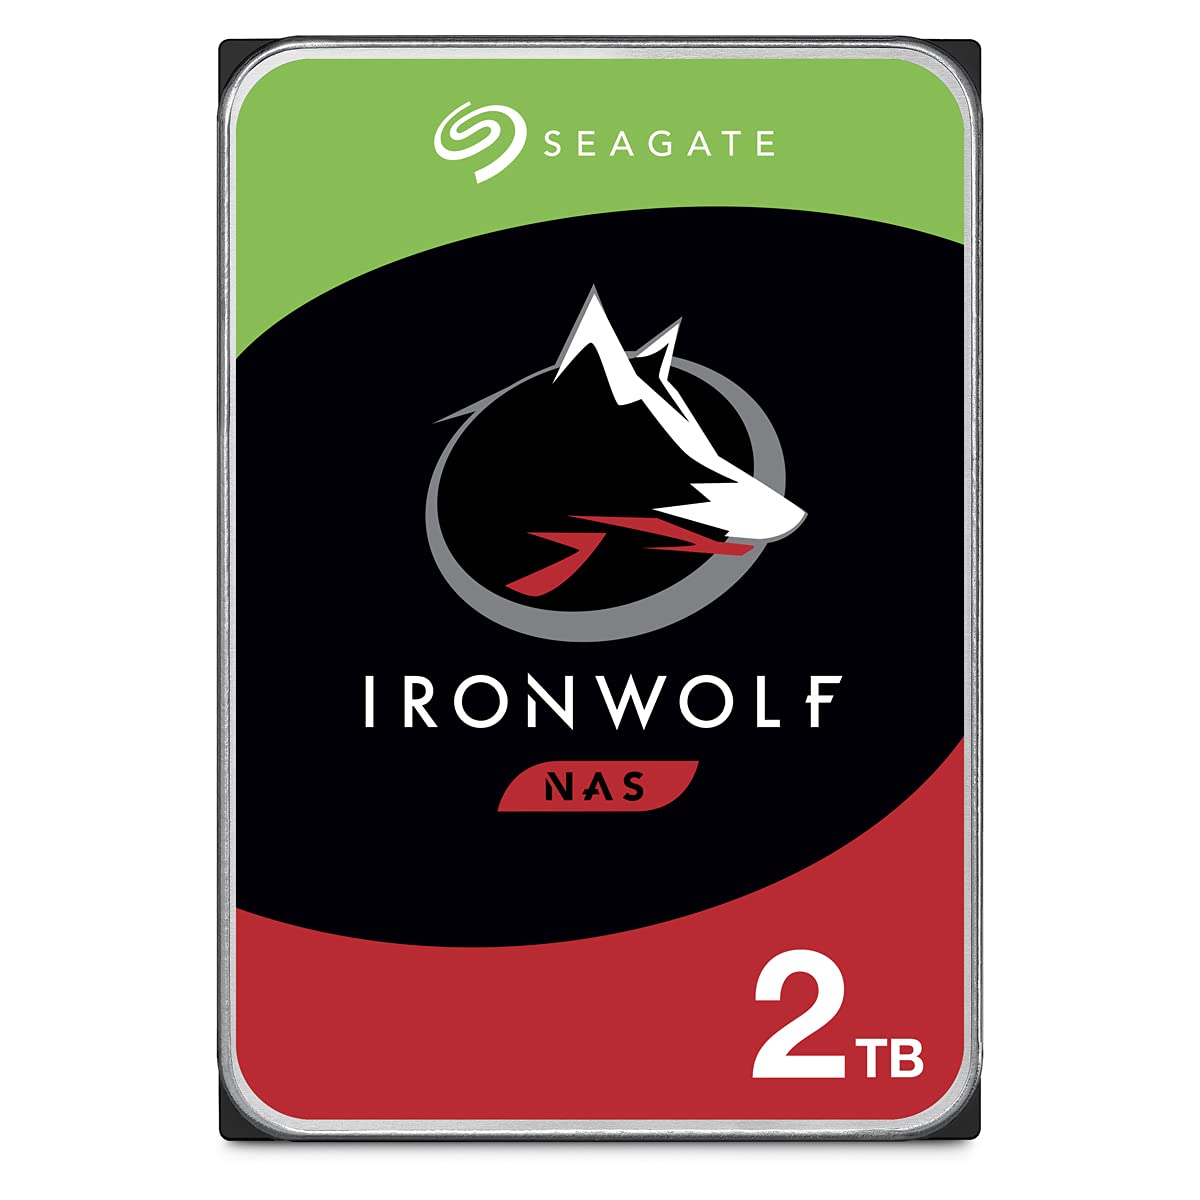 SEAGATE IRONWOLF 2TB 5.9K SATA 3.5IN HDD Hard Drive ST2000VN004 - Click Image to Close